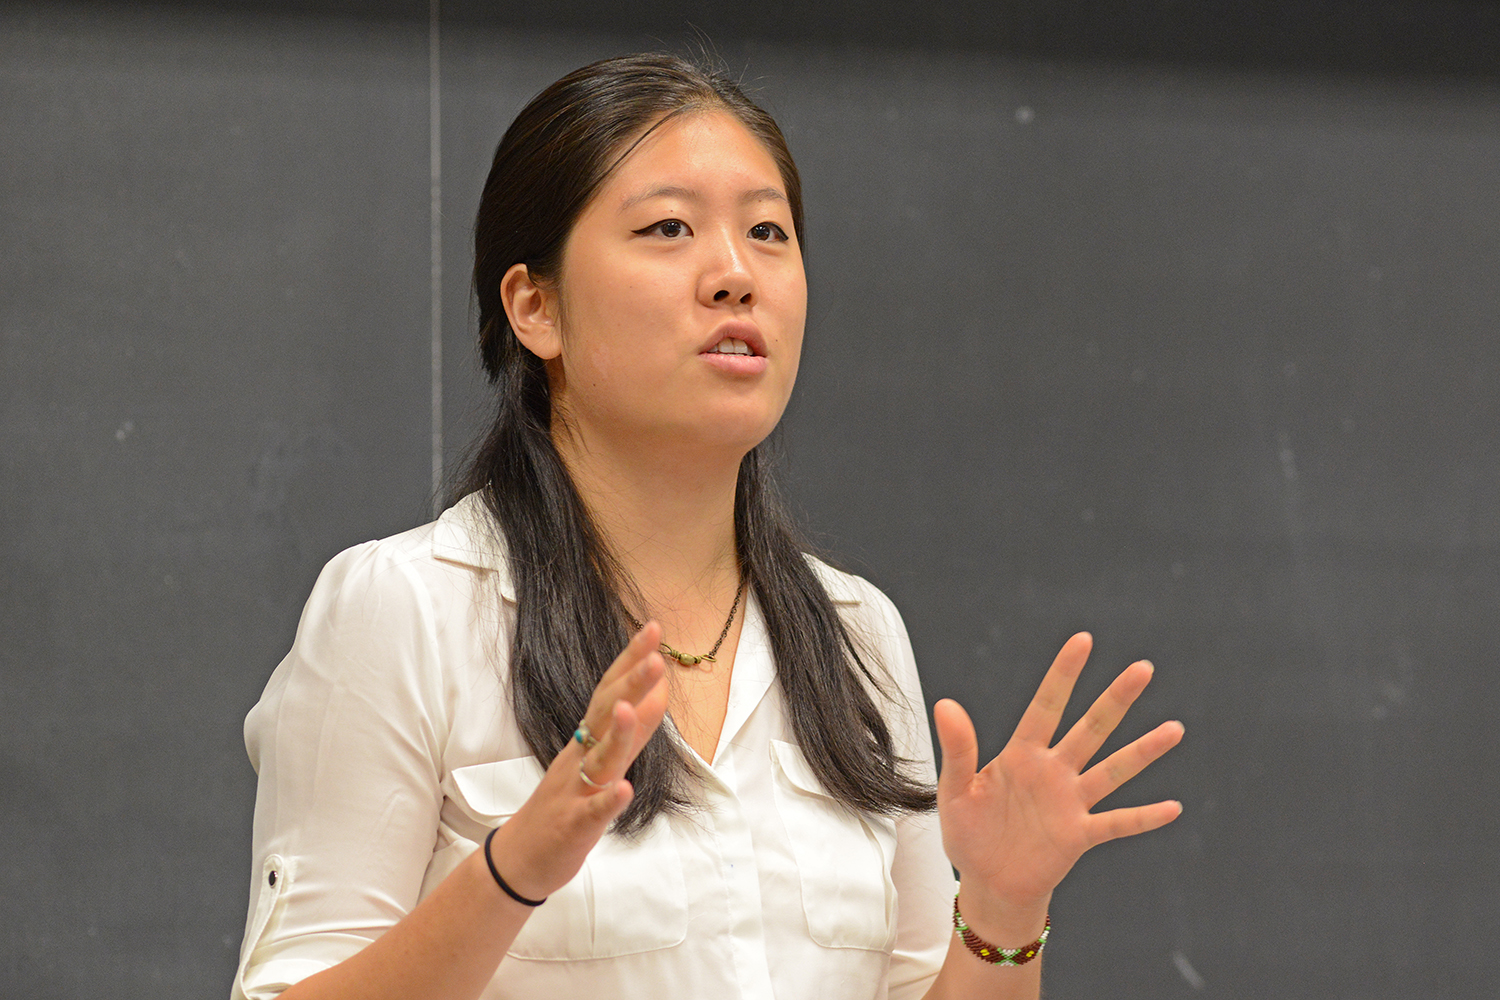 Lynn Ma ’16 presented “Solitude and the Political Life.”